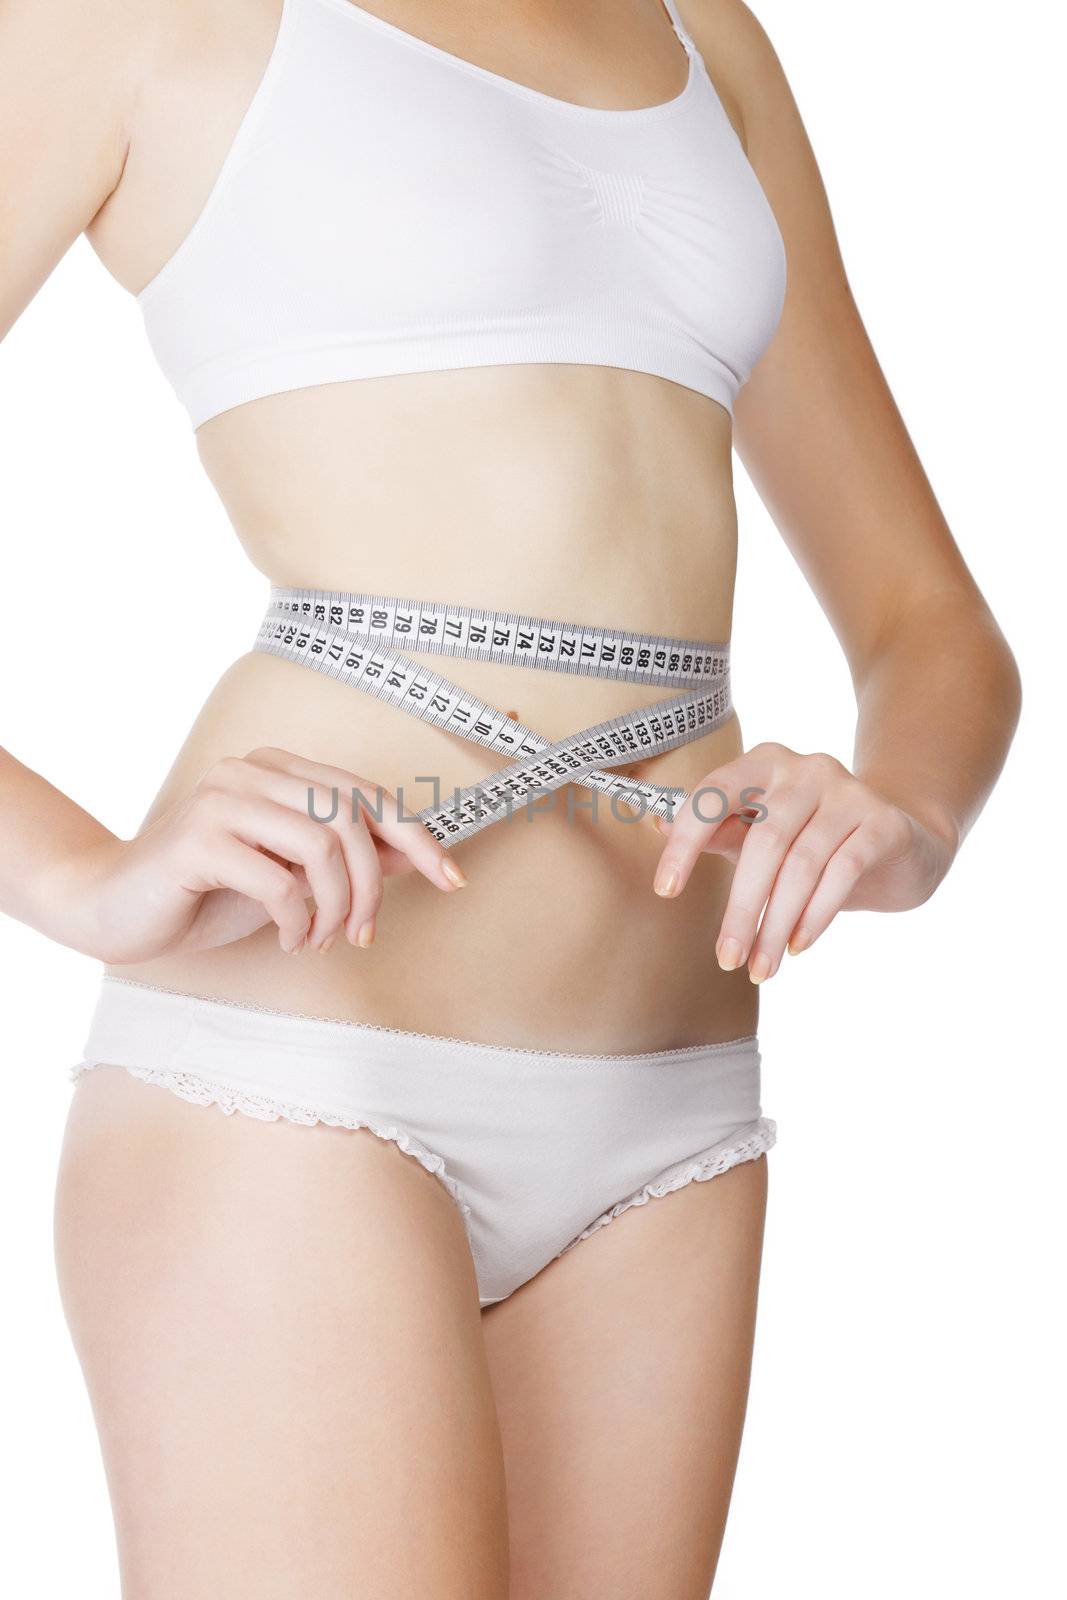 woman measuring size of her waist with a tape measure by Nobilior